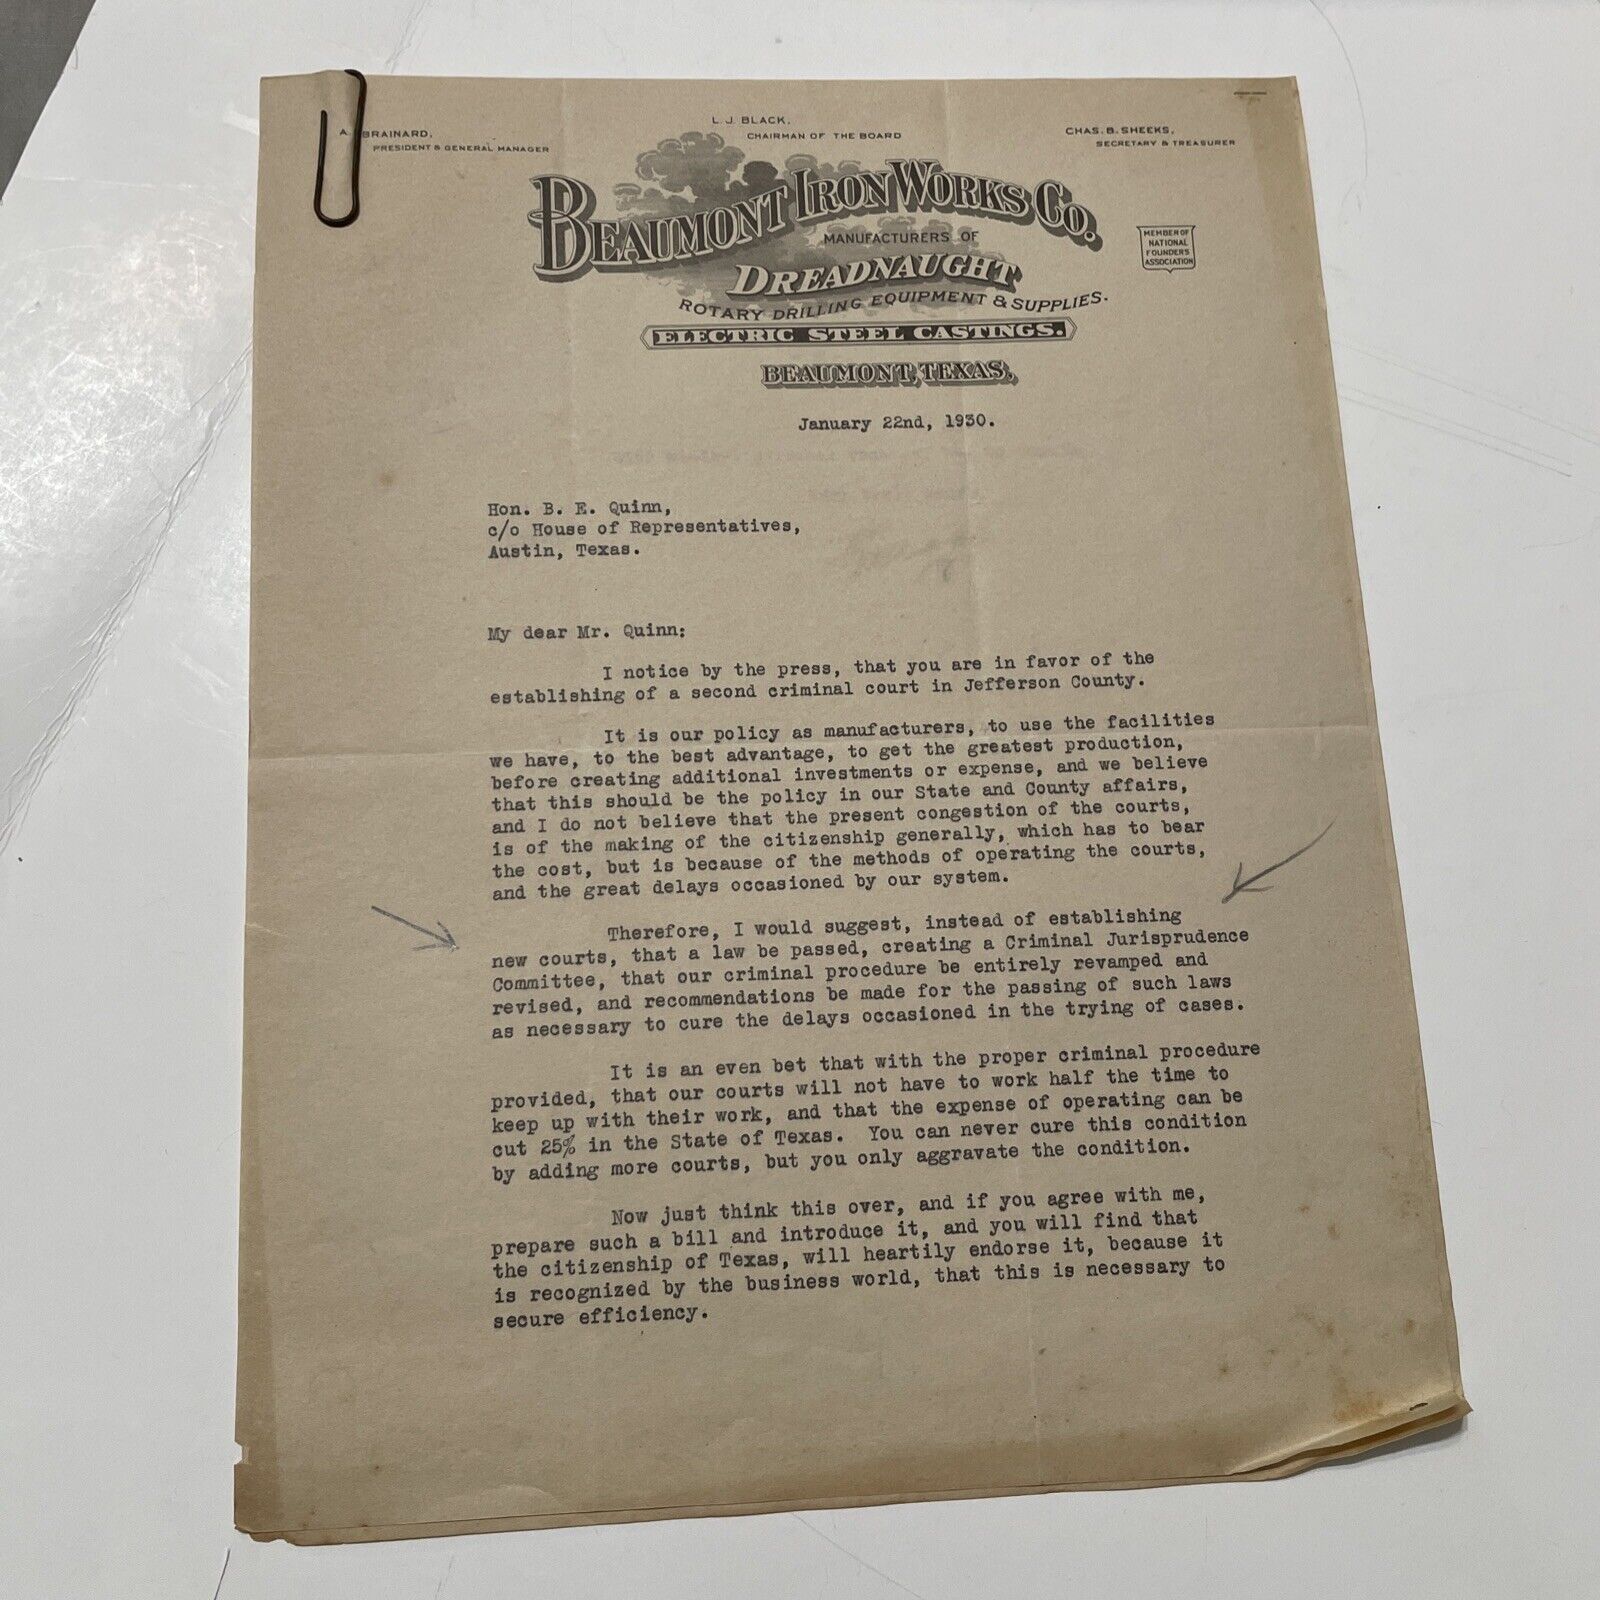 Beaumont Iron Works Drilling Equipment Mfgrs letter 1930 Dreadnaught drilling